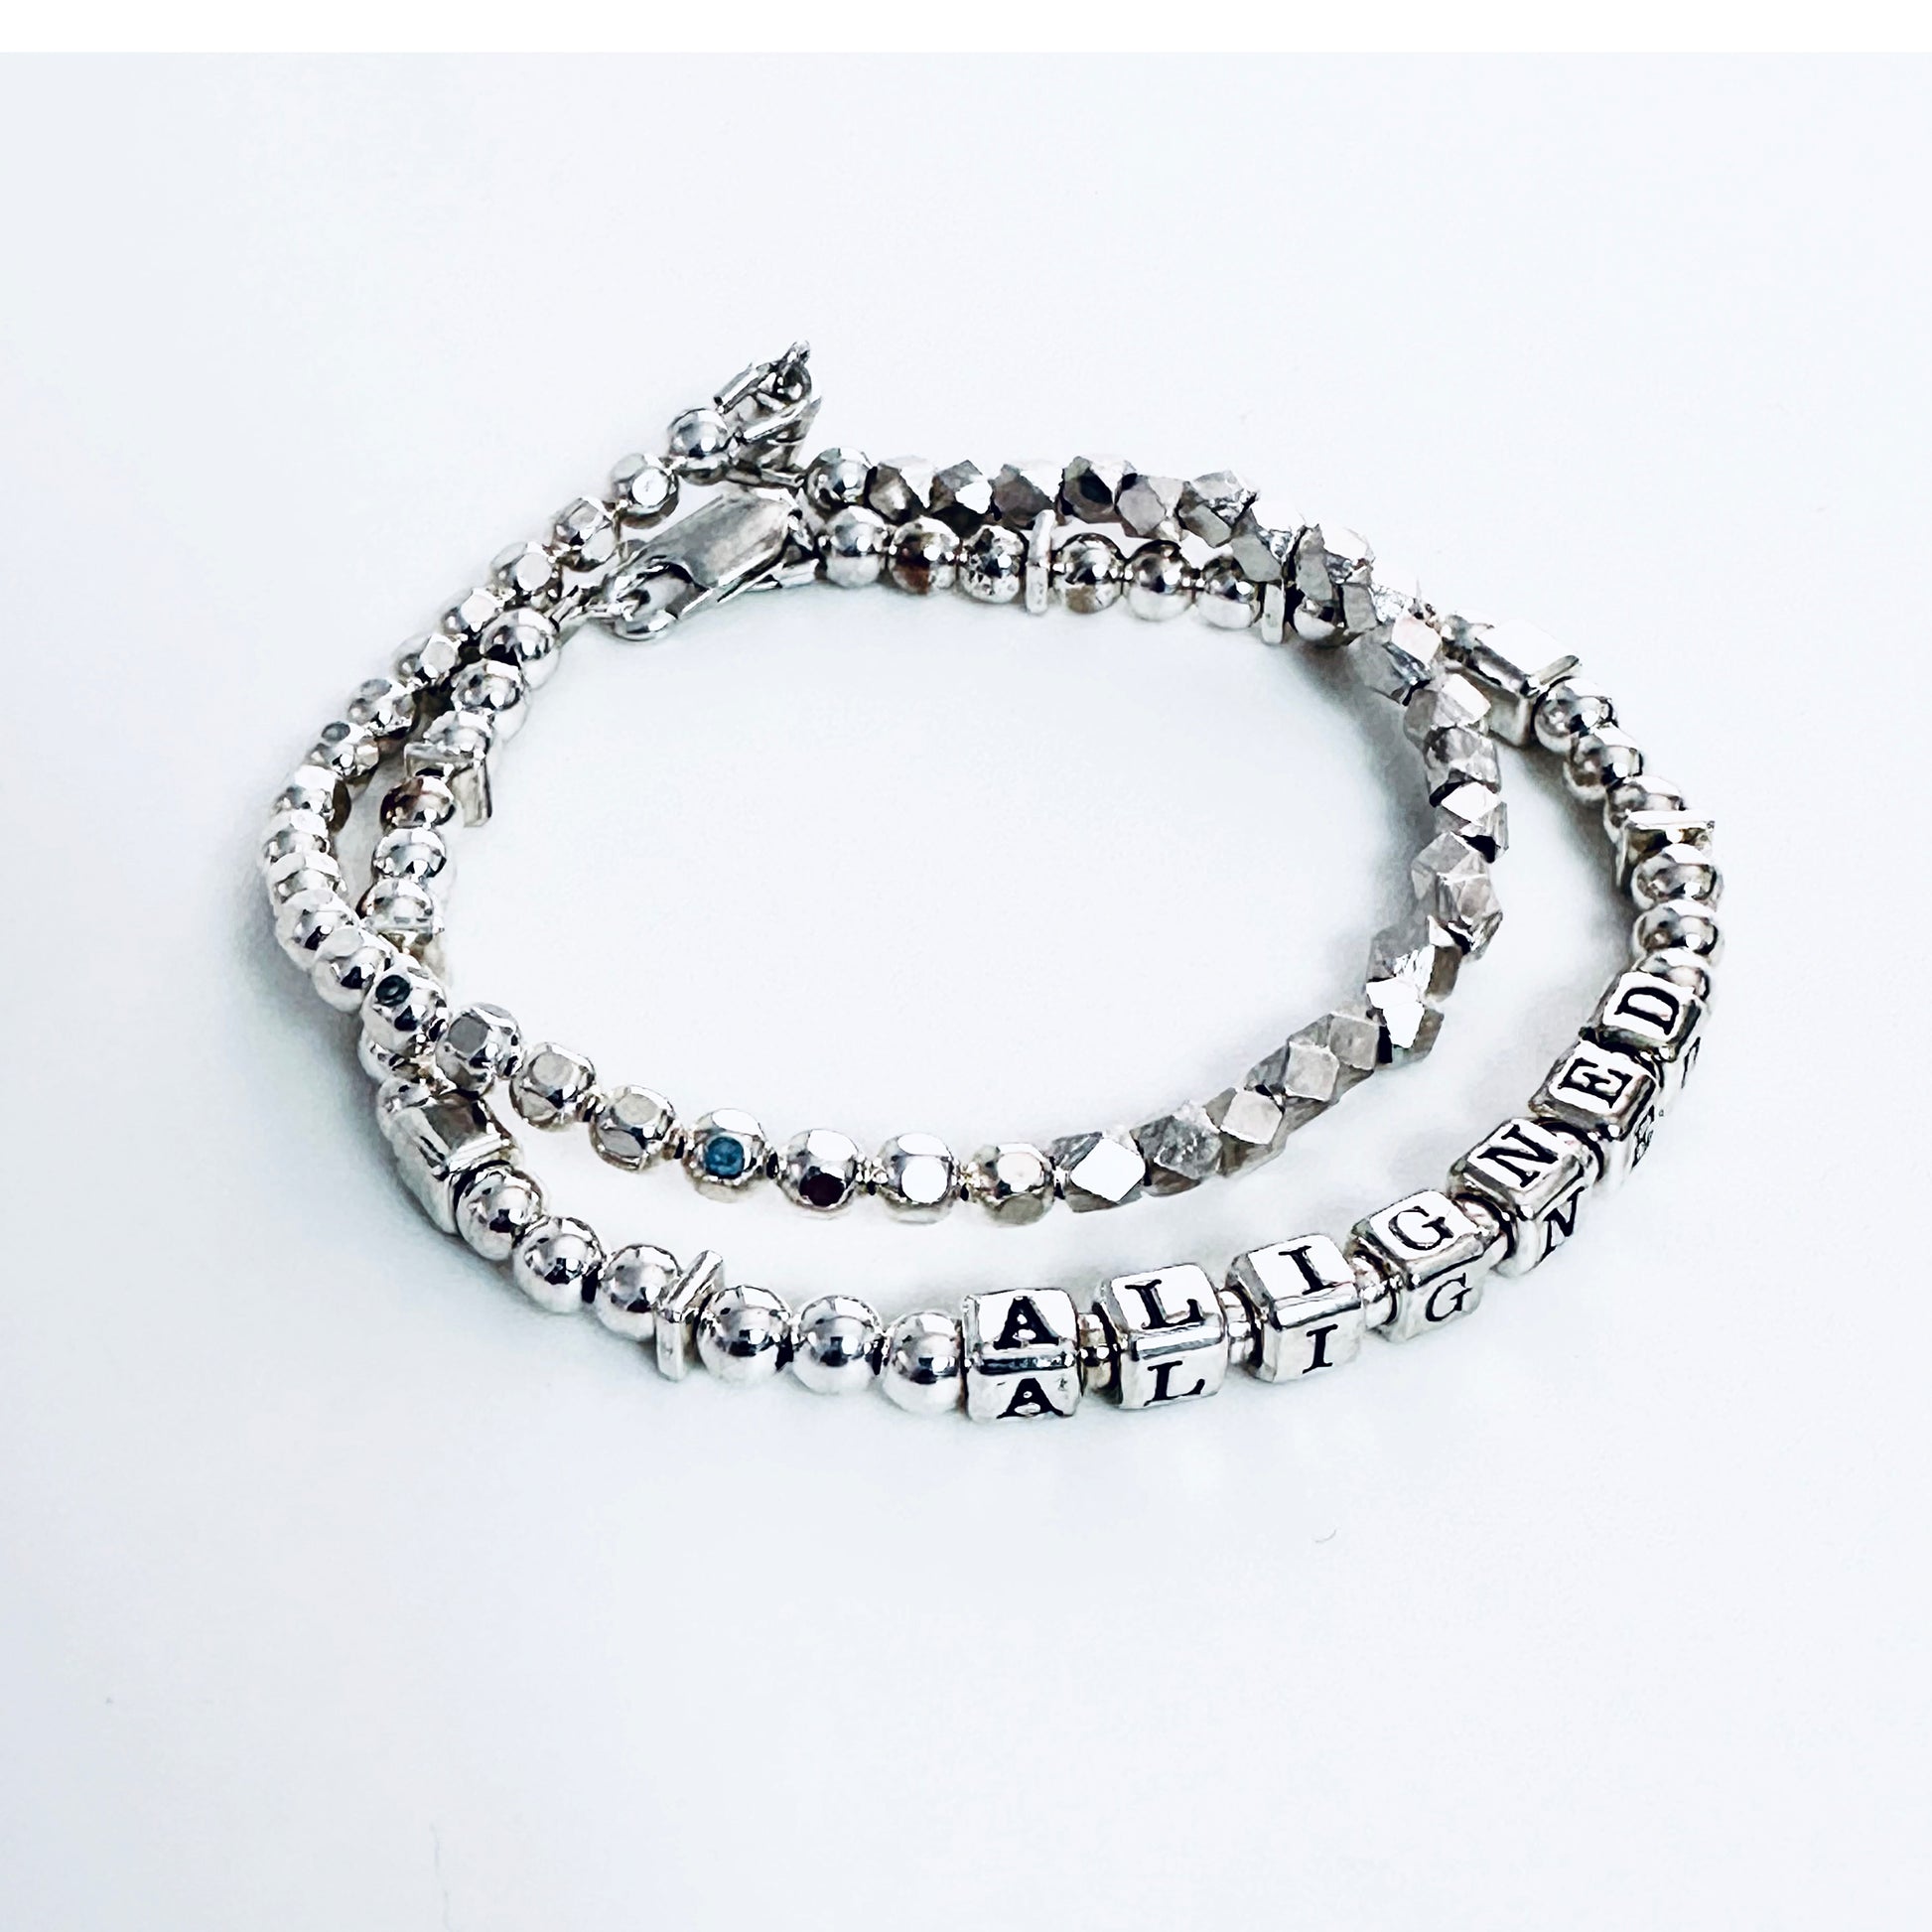 beaded sterling silver bracelet shown with Sterling silver Aligned bracelet